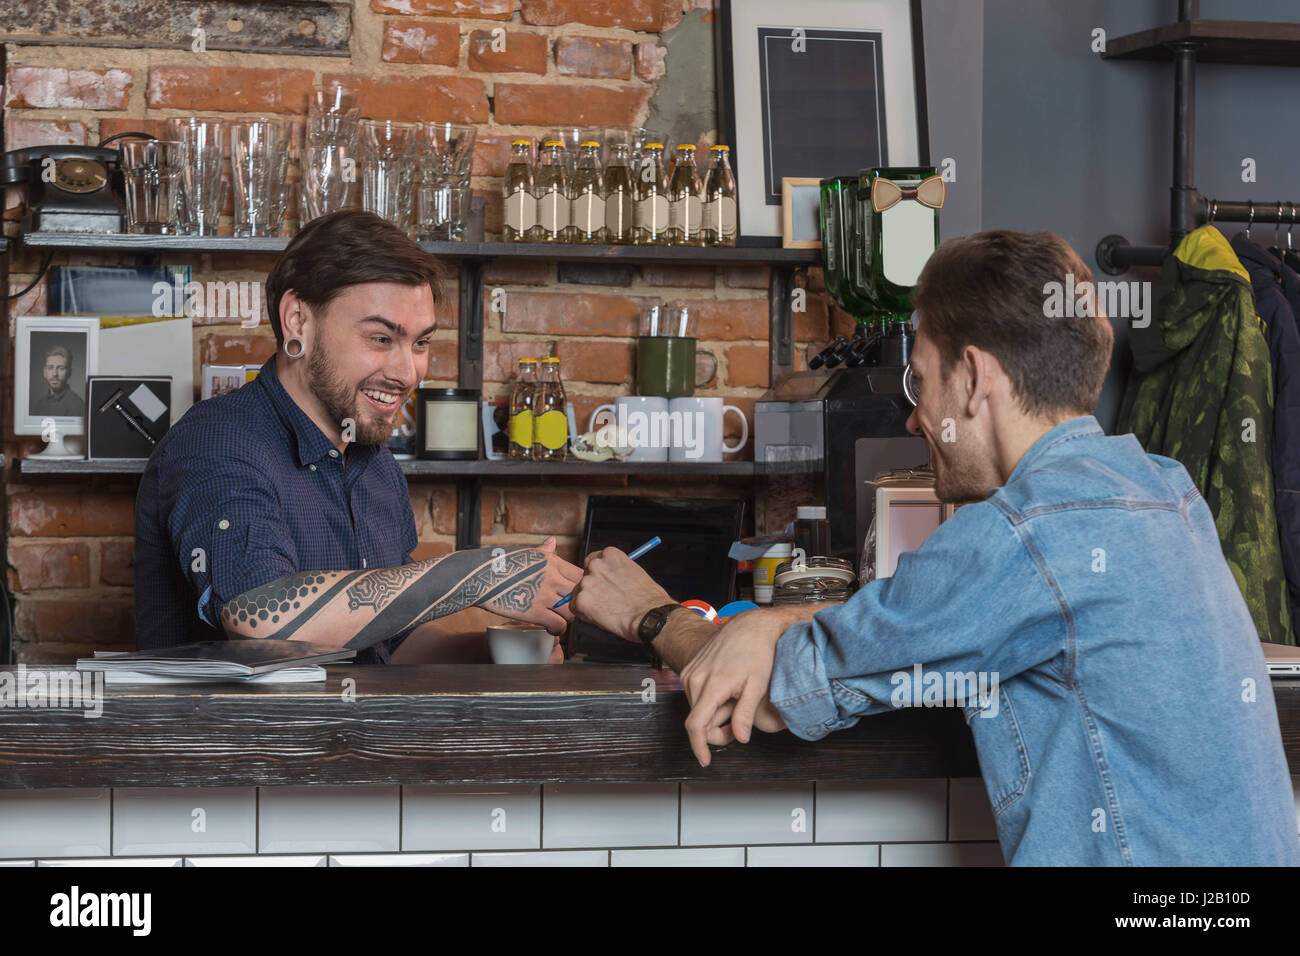 Cheerful male barbers sitting at bar counter in hair salon Stock Photo